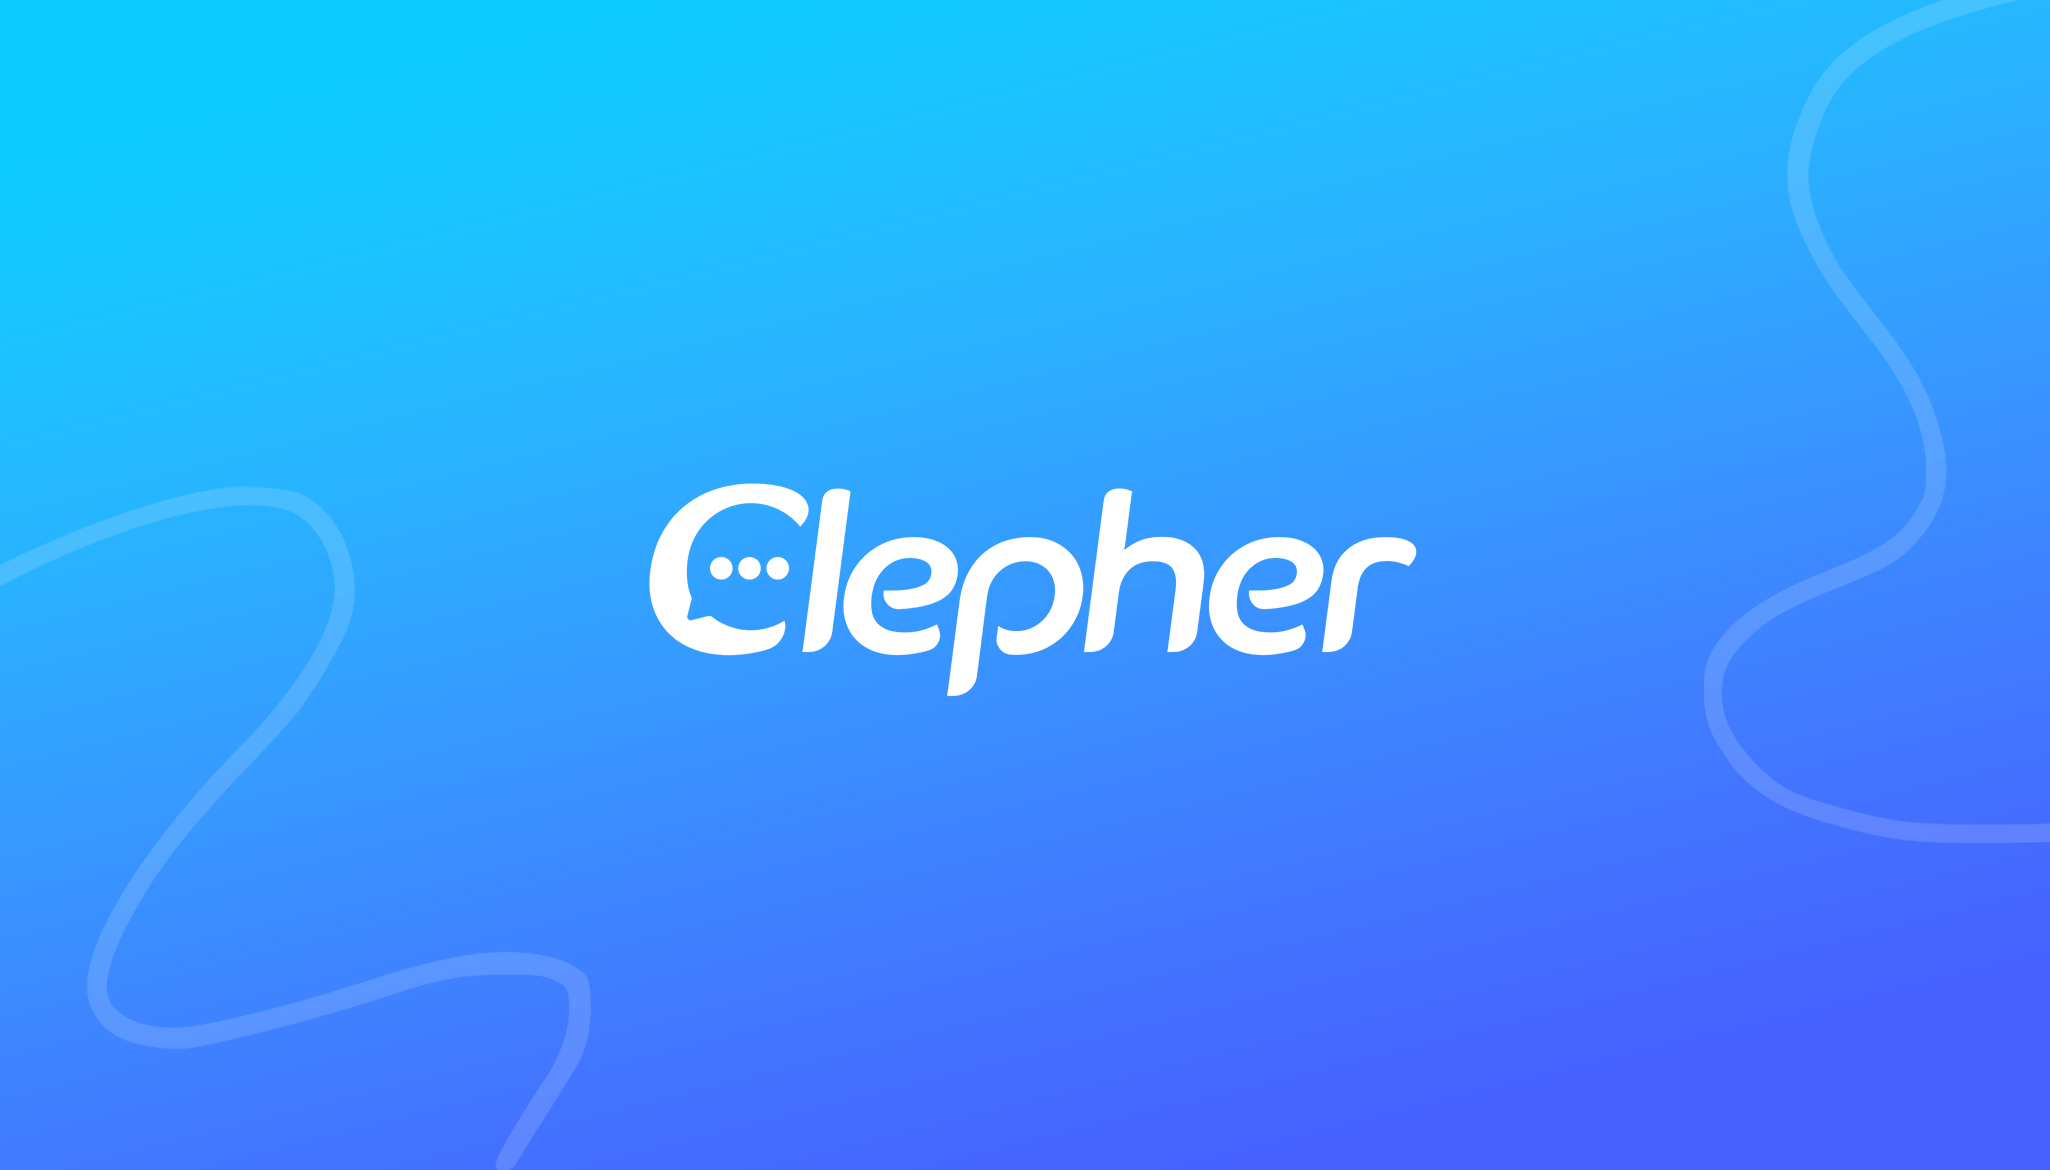 Implement Loyalty Programs Using a Clepher Chatbot